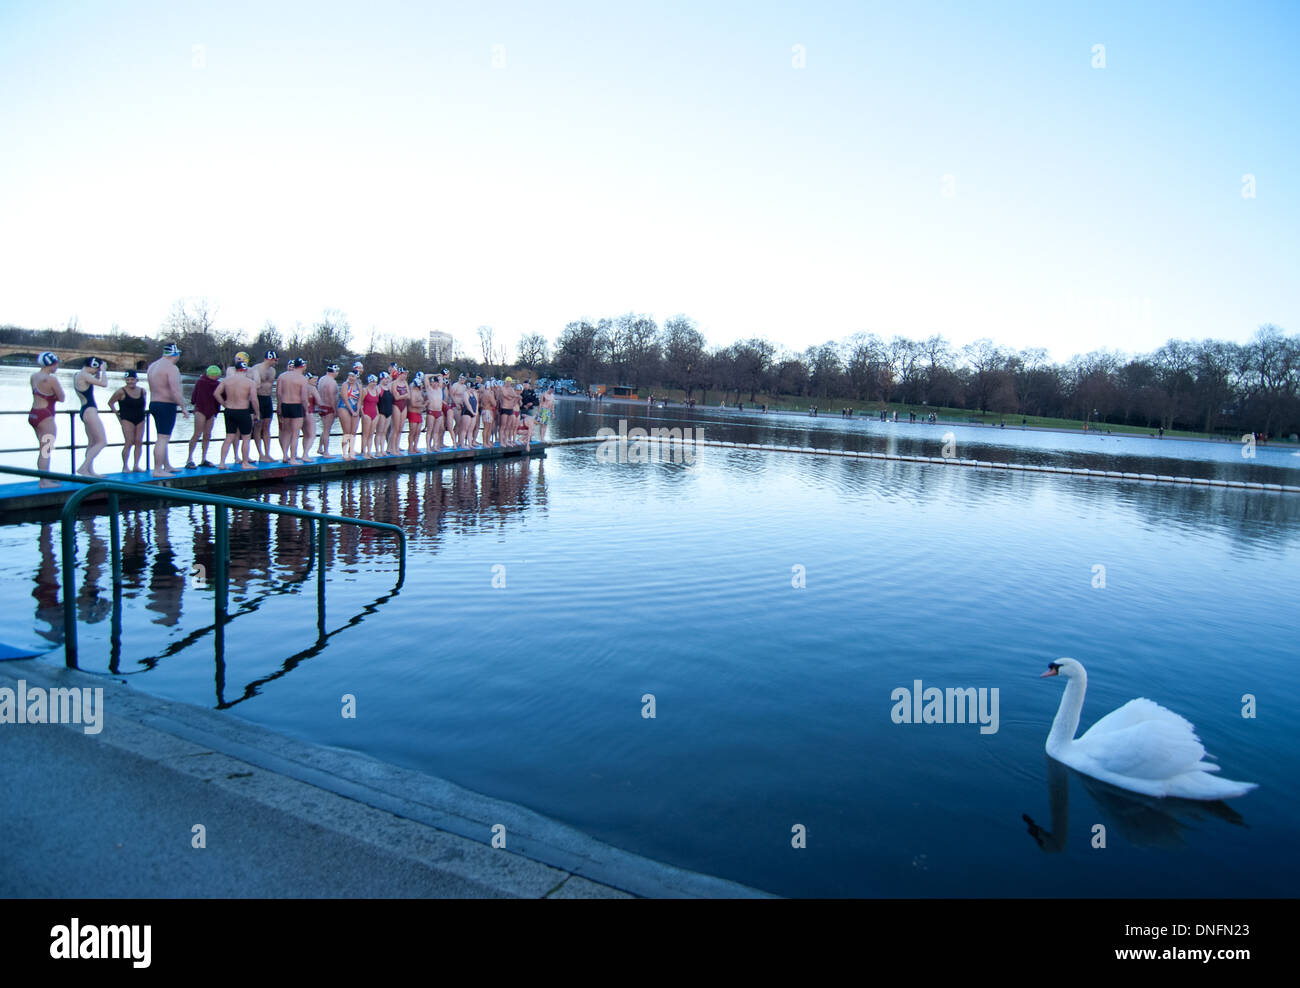 Members of the Serpentine Swimming Club prepare to swim in the icy Serpentine waters during the annual Christmas Day swim. The Peter Pan Cup Stock Photo